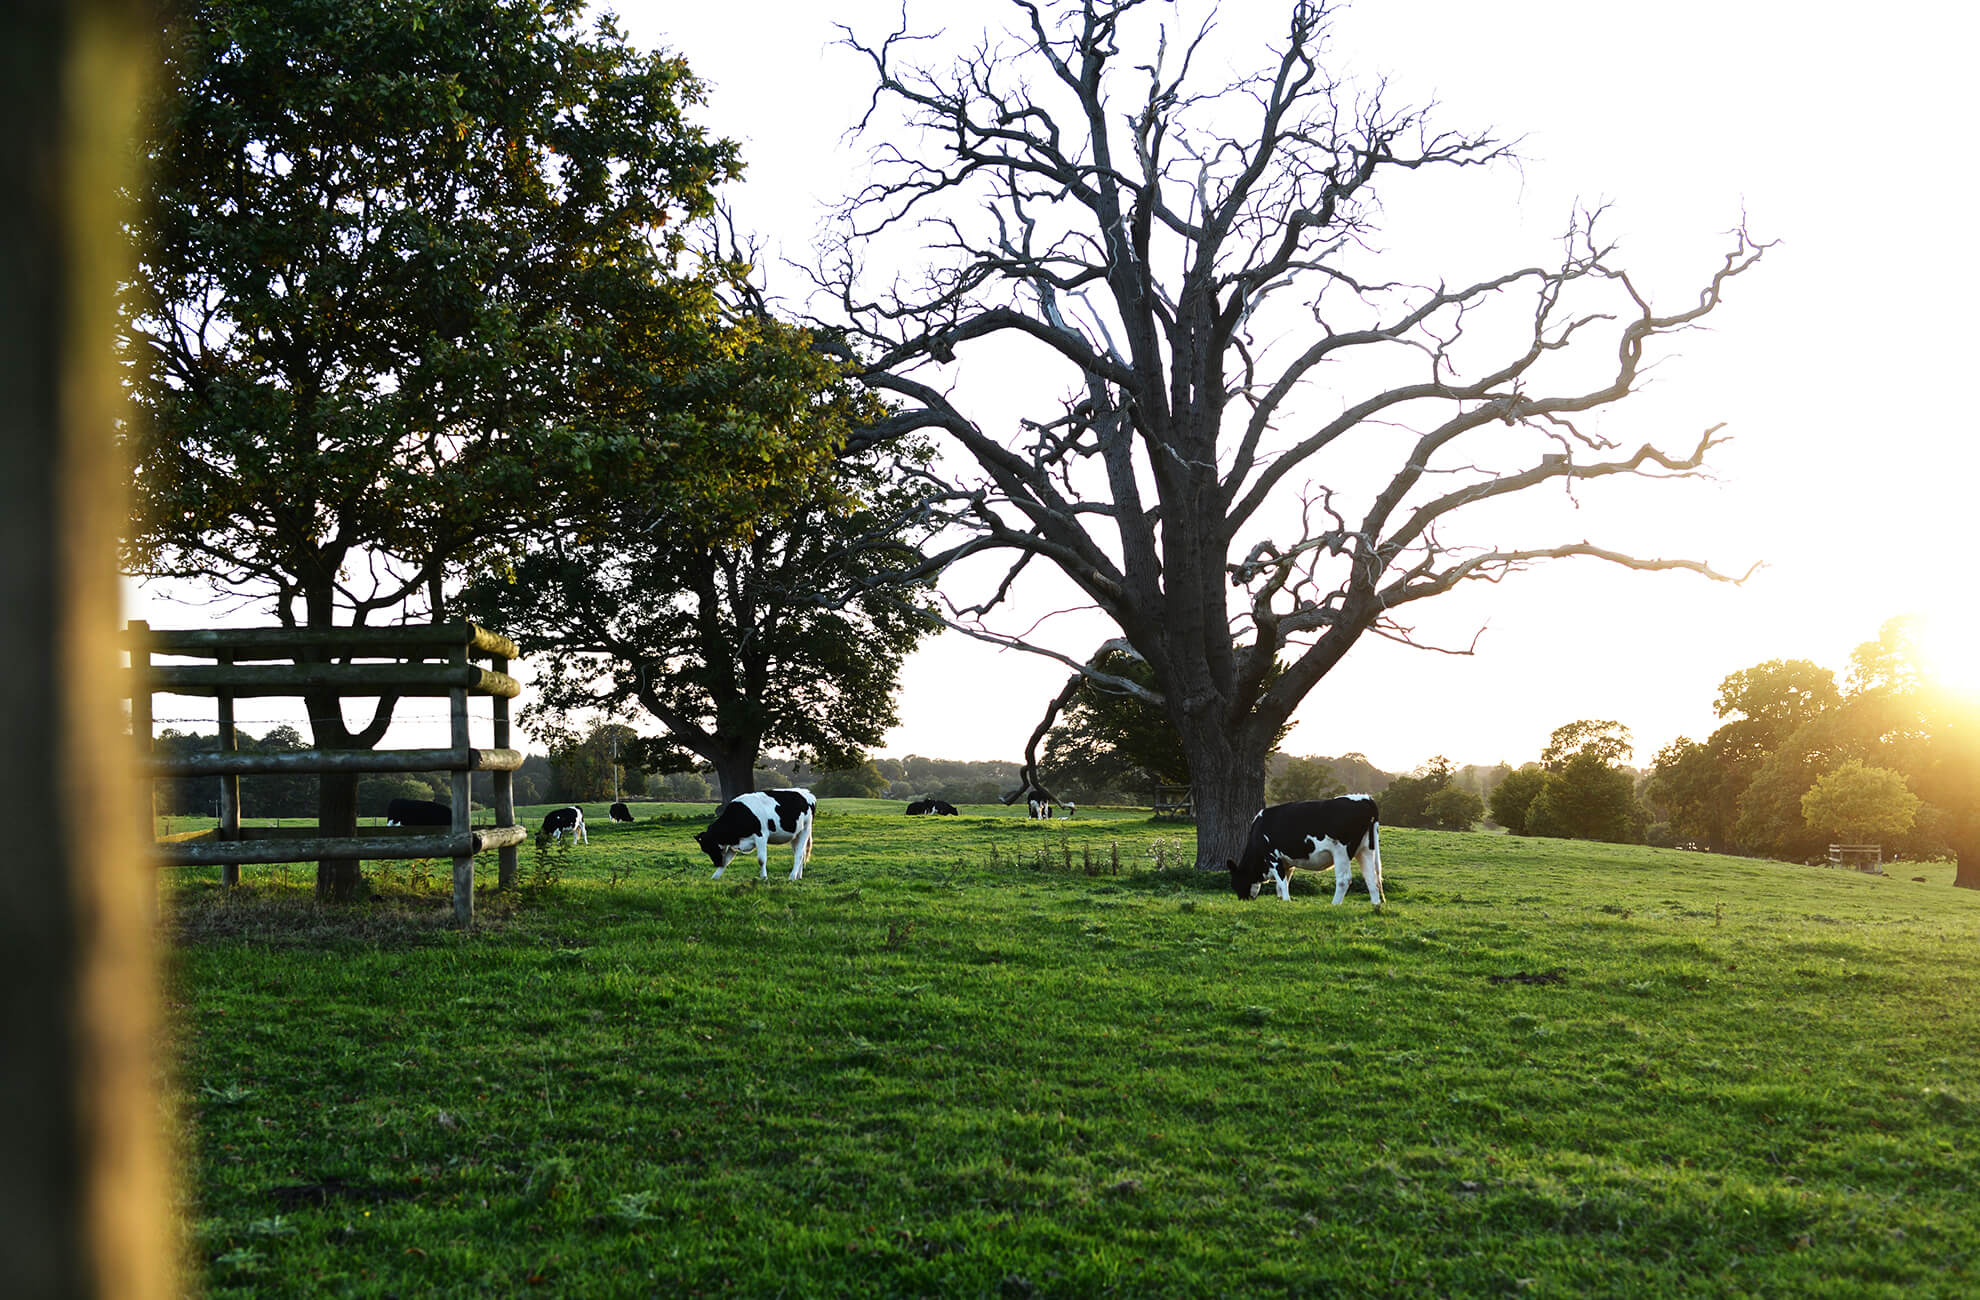 Cows bask in the summer sun in the stunning English countryside that surrounds Combermere Abbey